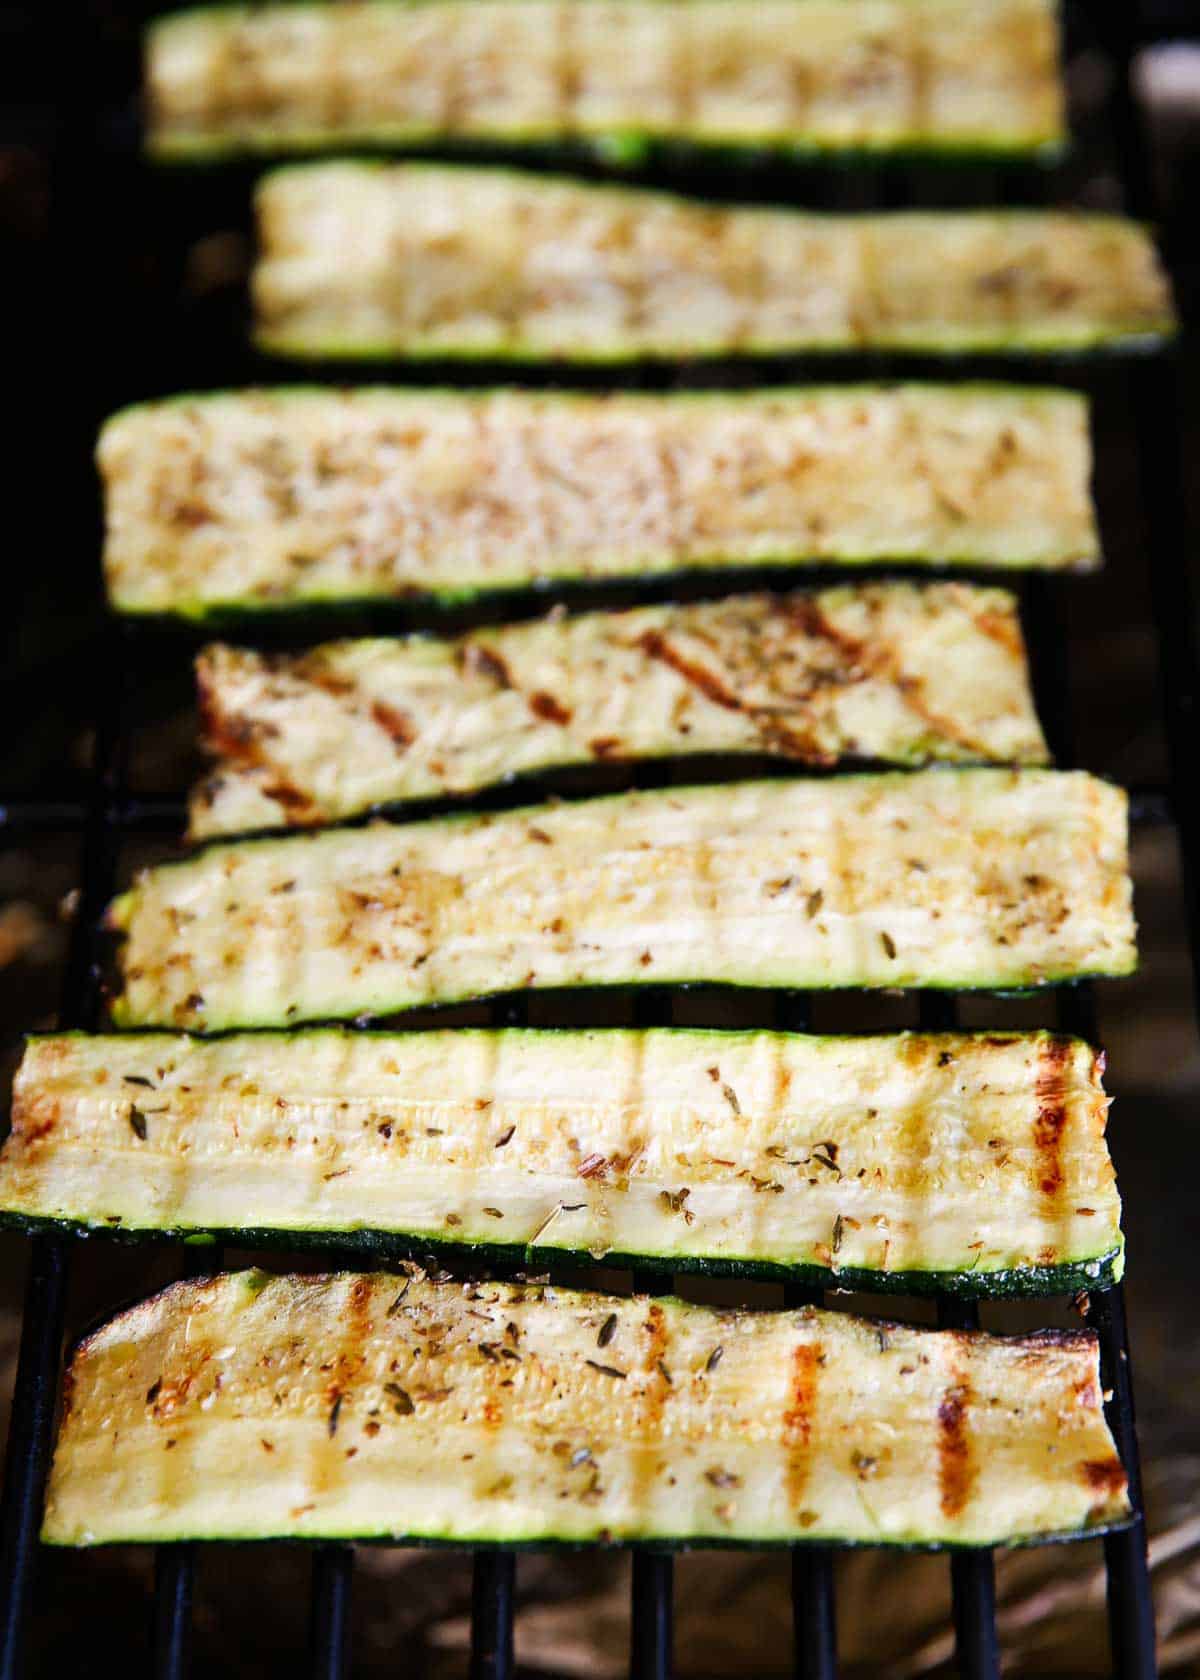 Grilled zucchini cooking on grill.